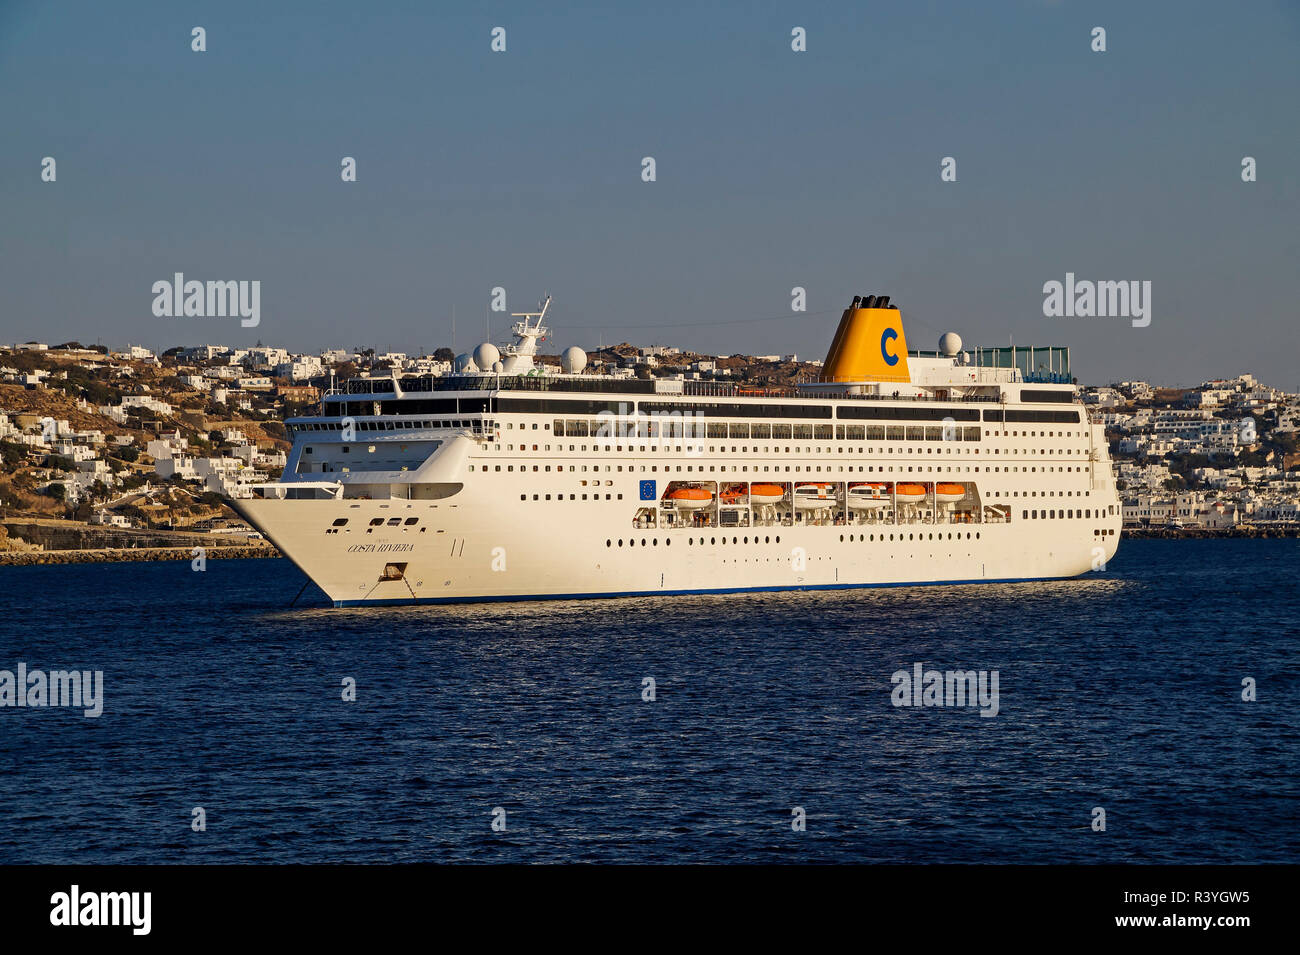 Costa Cruises cruise ship Costa Riviera at Mykonos town on island Mykonos in the Cyclades group in the Aegean Sea Greece Stock Photo